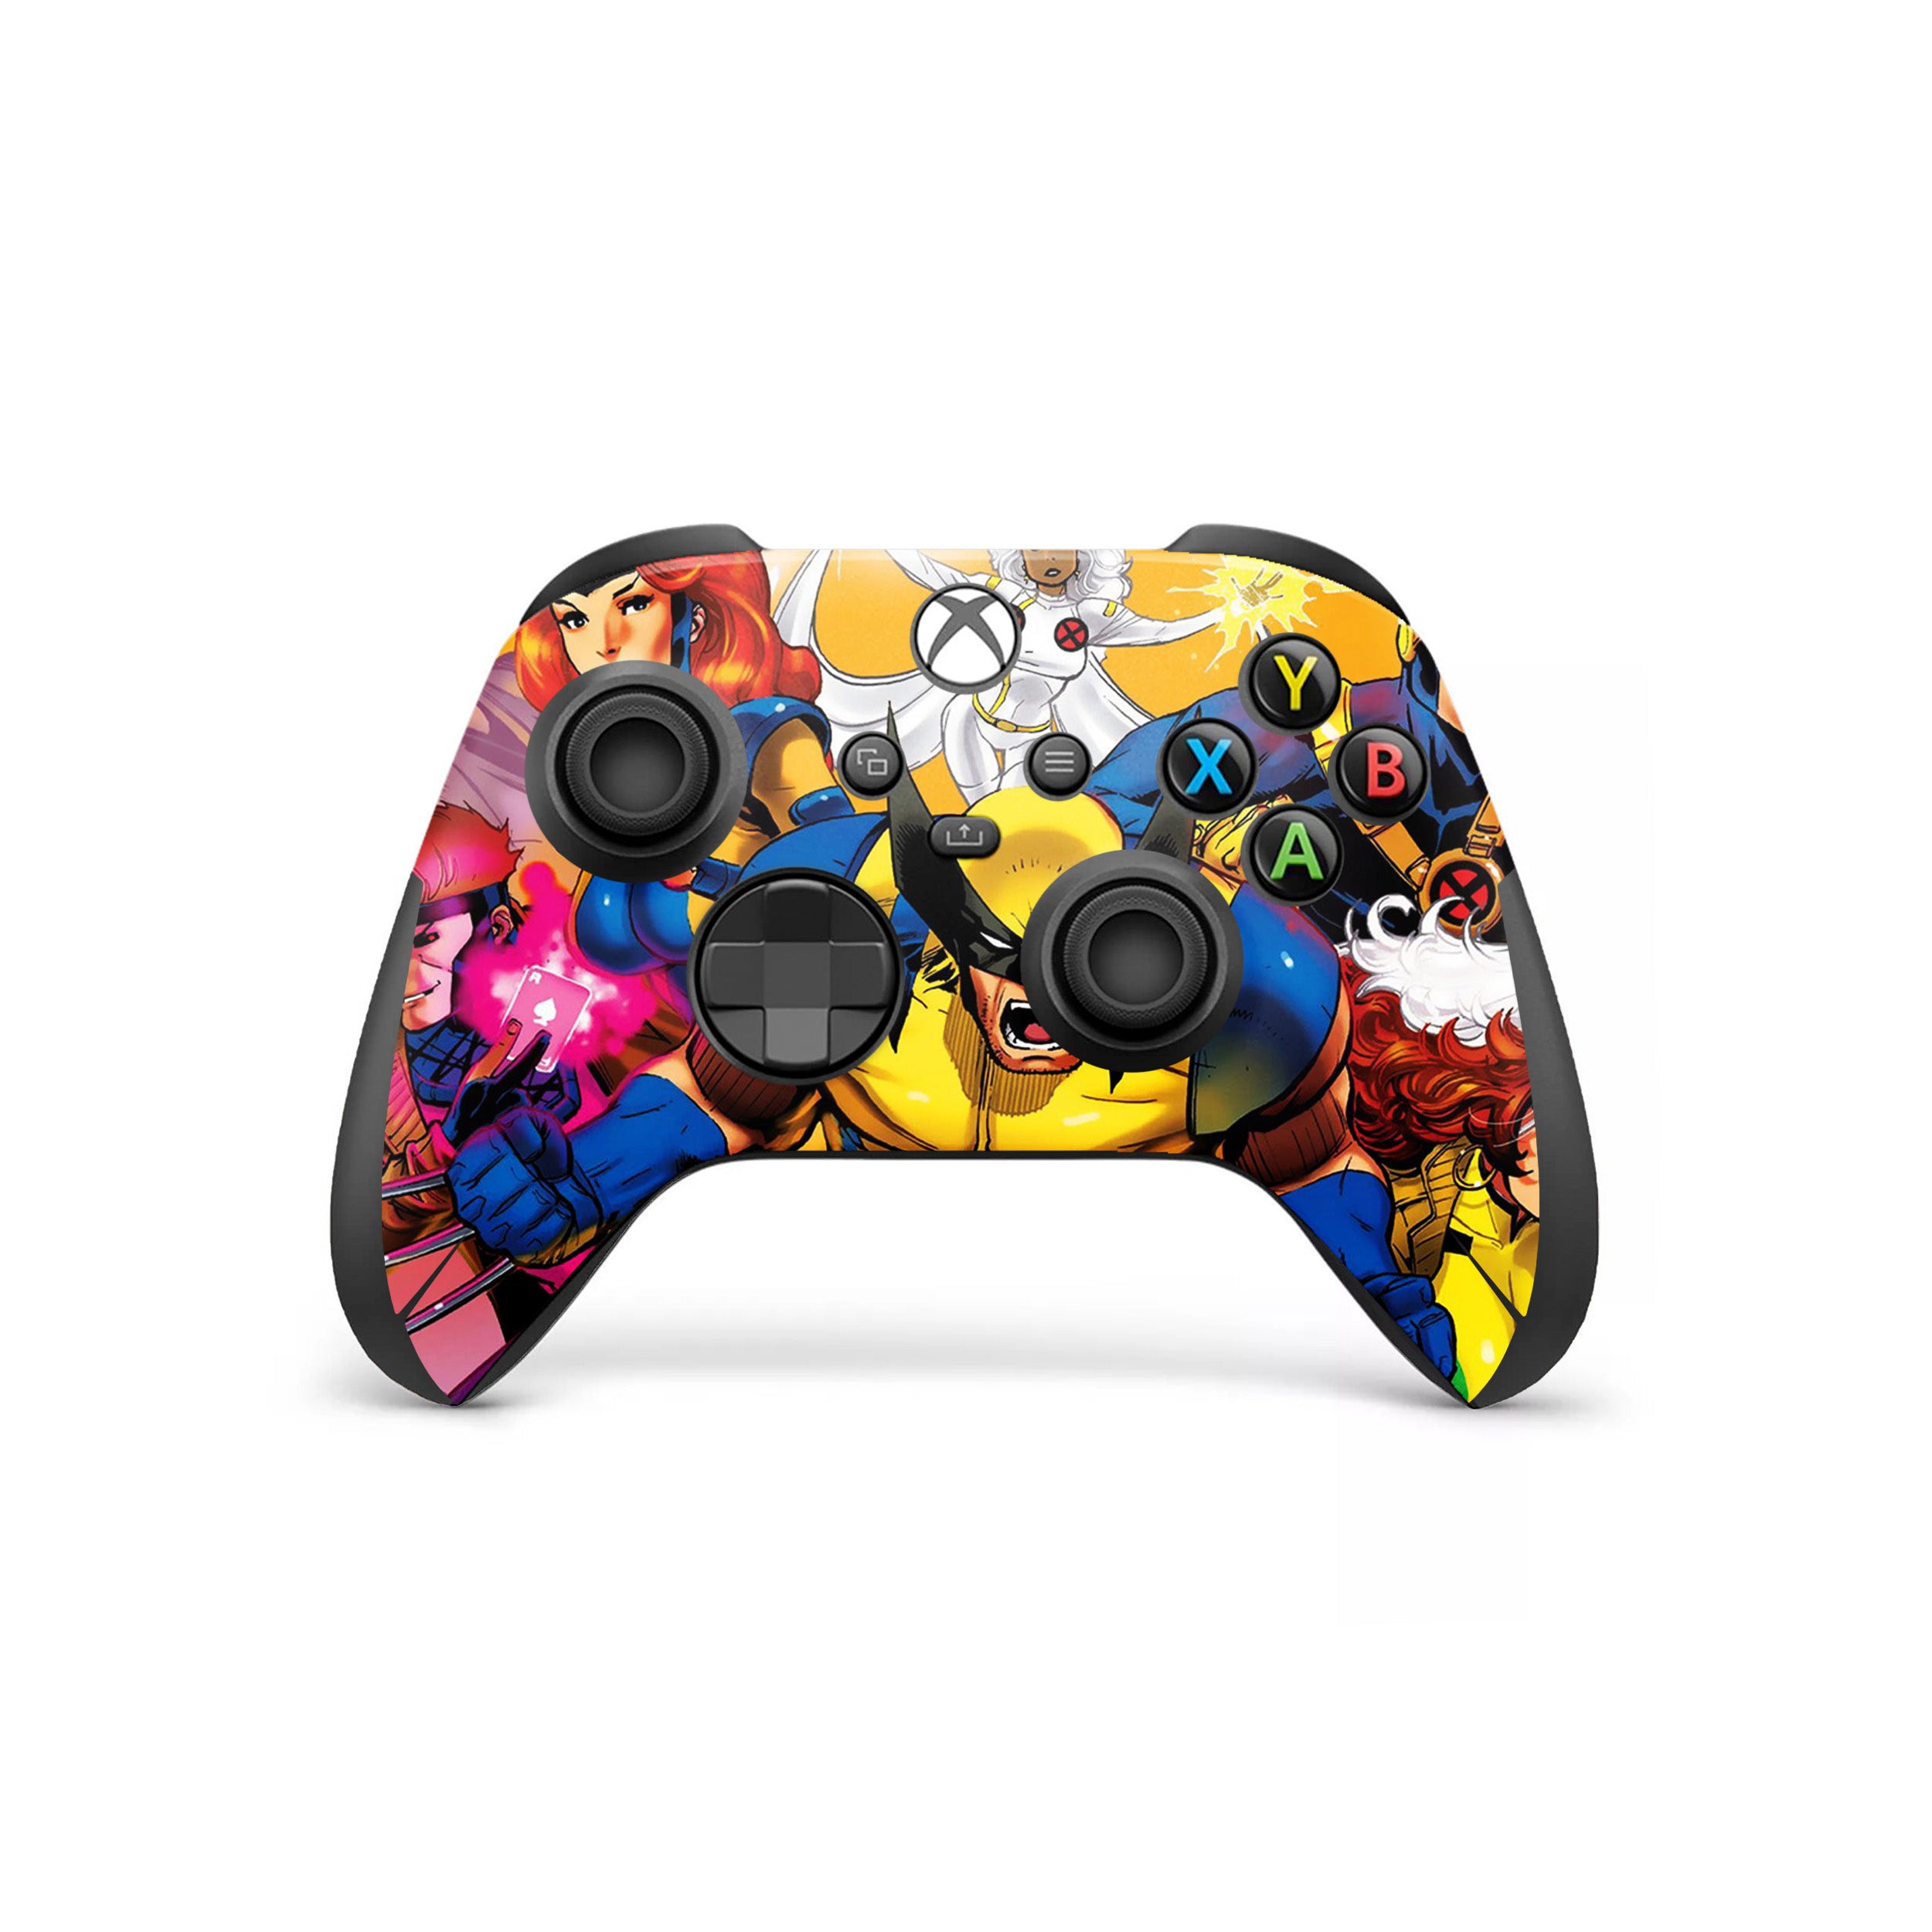 A video game skin featuring a Marvel X Men design for the Xbox Wireless Controller.